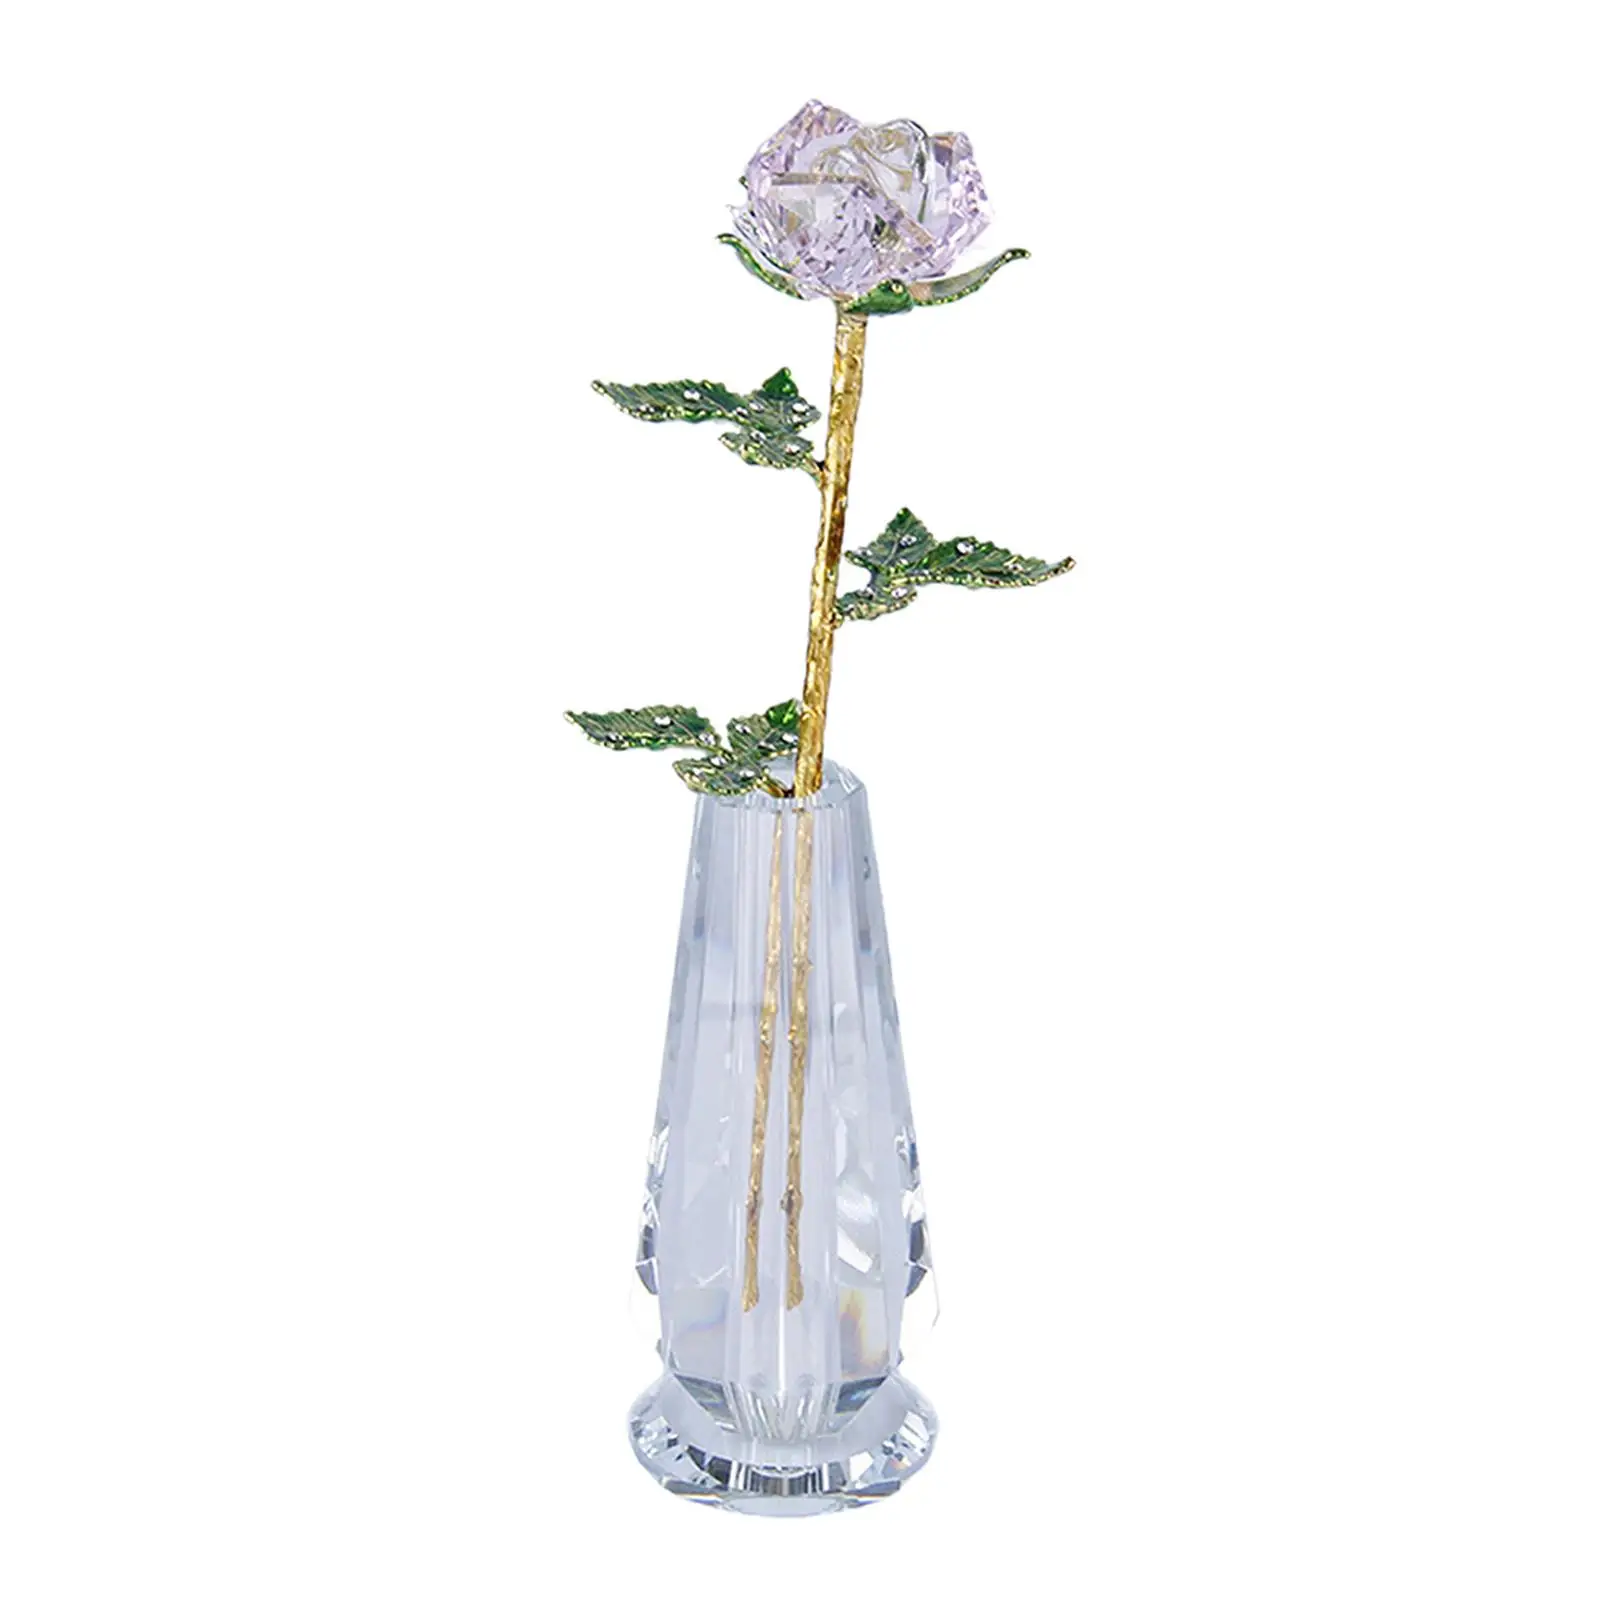 Unique Crystal Ornament Artwork Figurines for Birthday Home Women